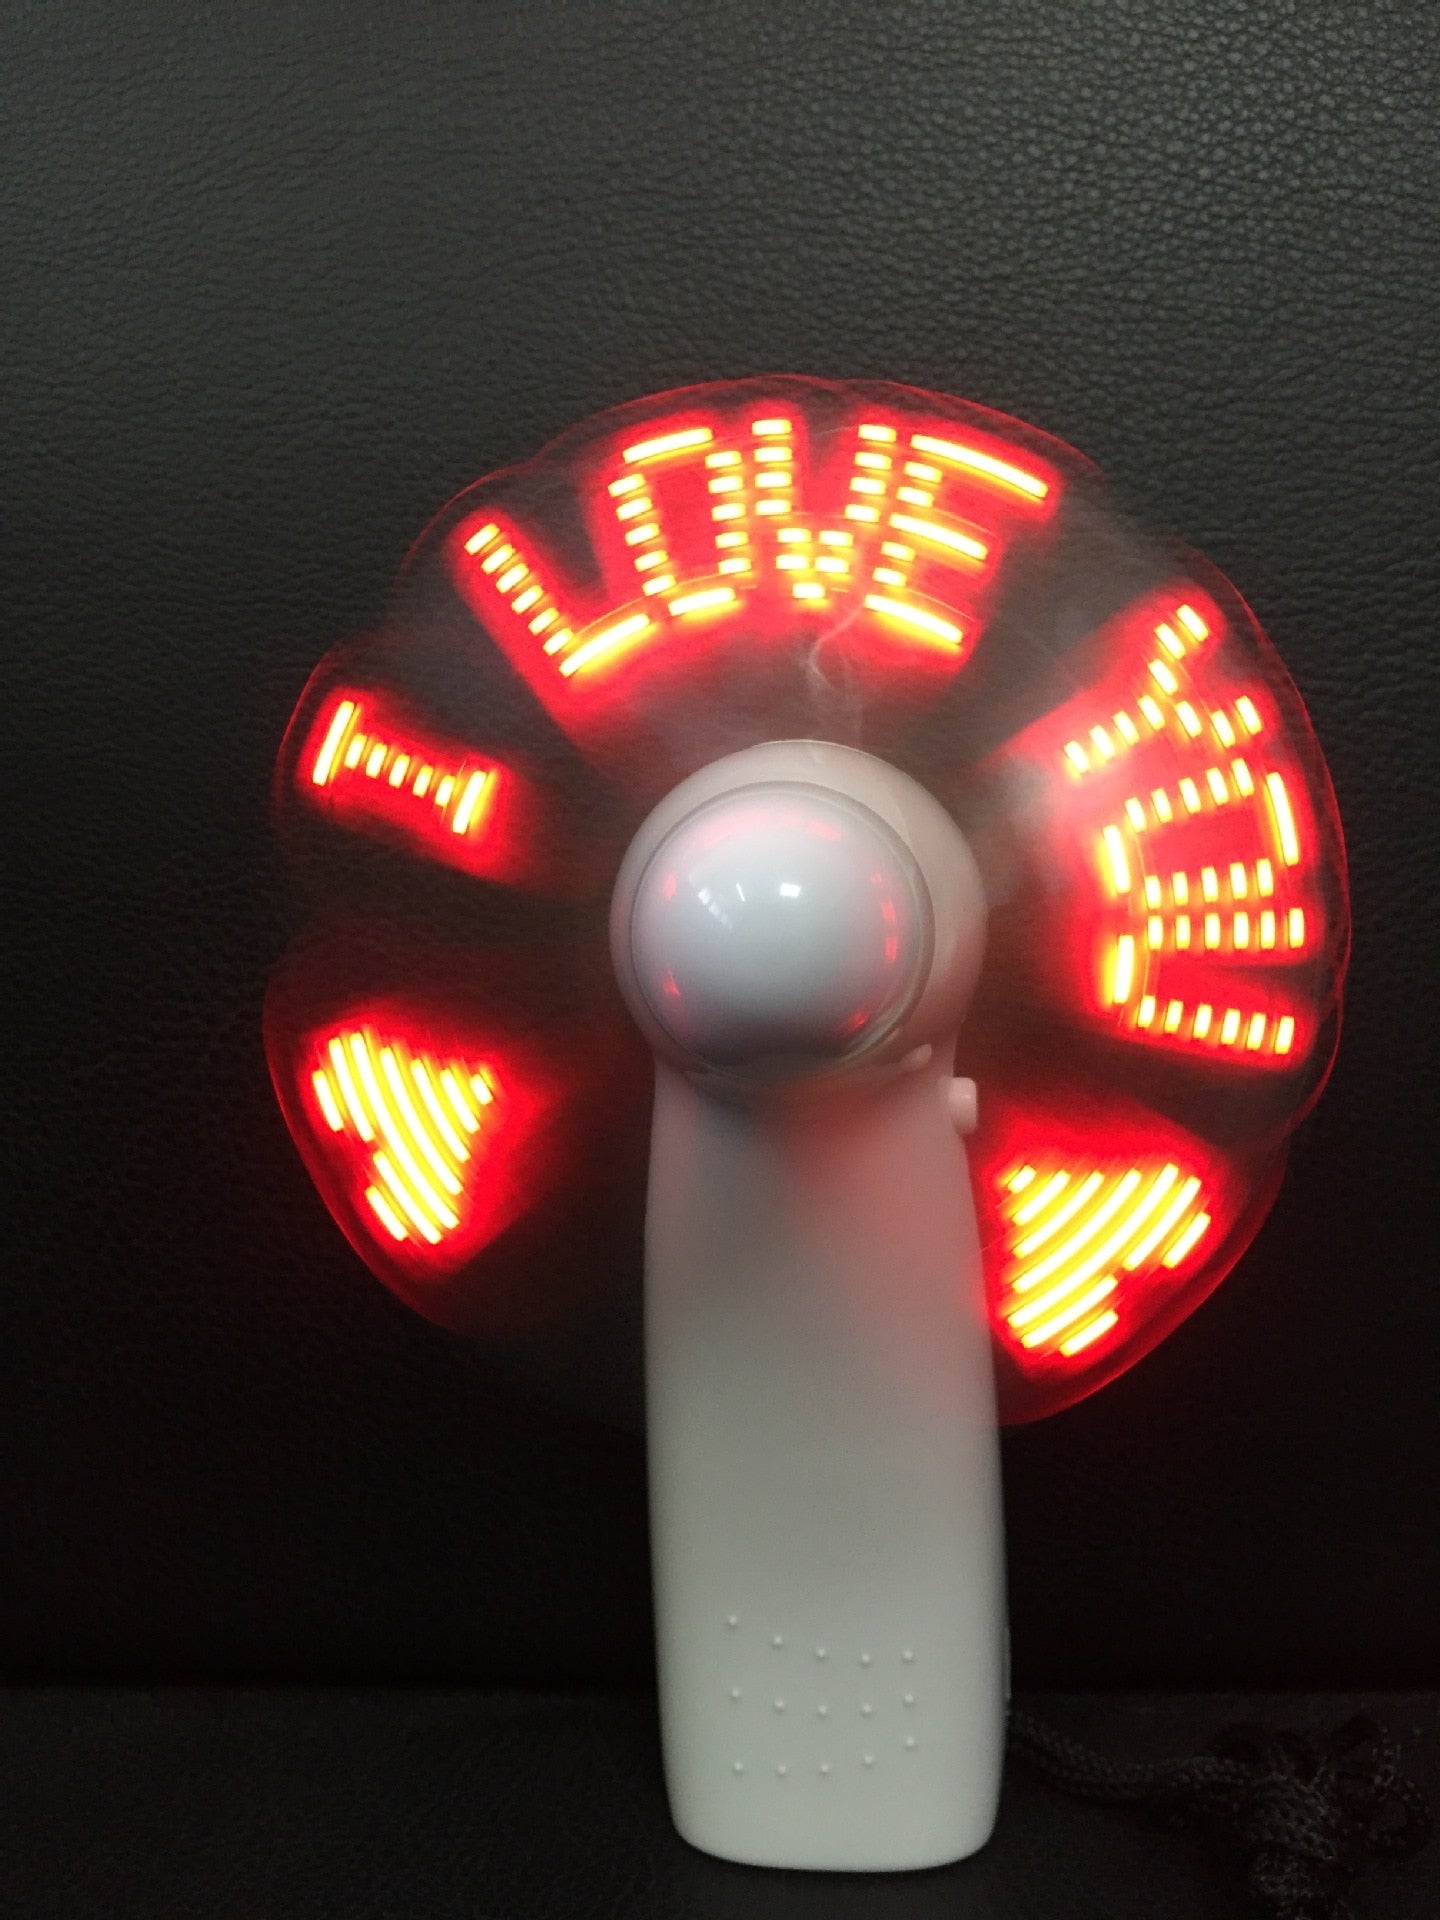 "I Love you" Handheld Mini Fan by Style's Bug - Style's Bug Red